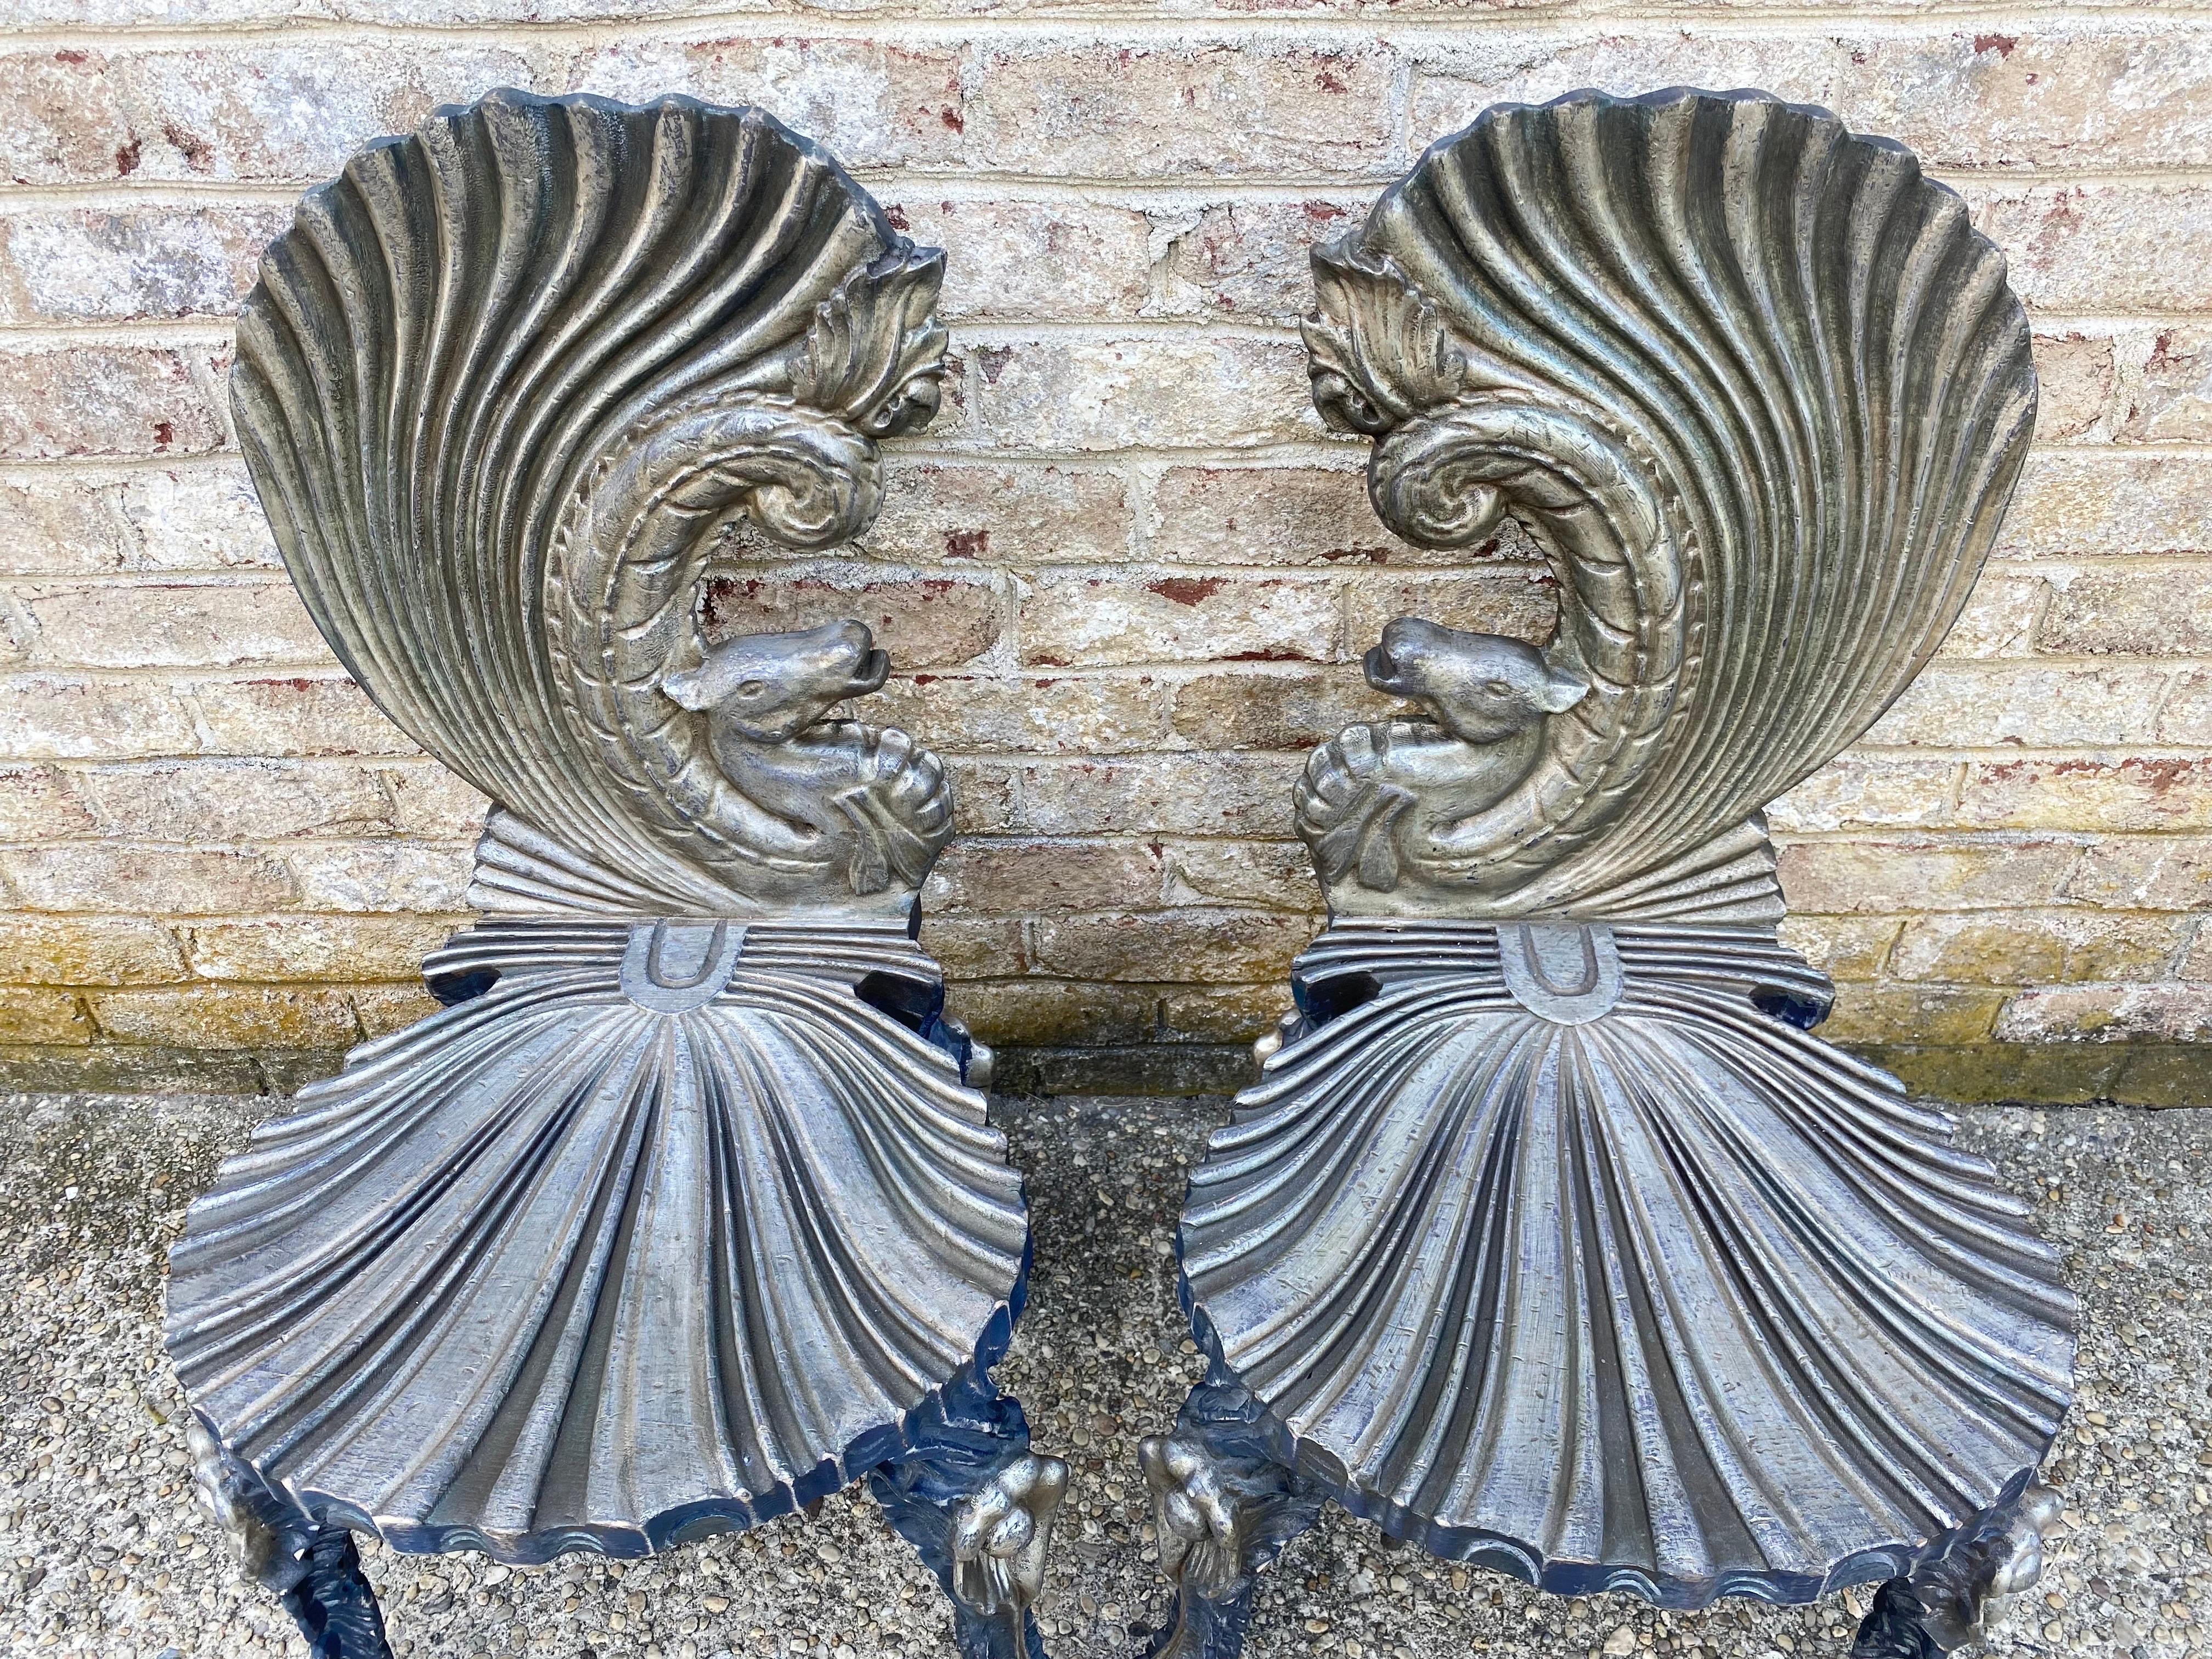 Unique pair of Venetian style grotto chairs with seahorse carved back and scallop seats in a silvered wood.... the legs are carved in the shape of shells.